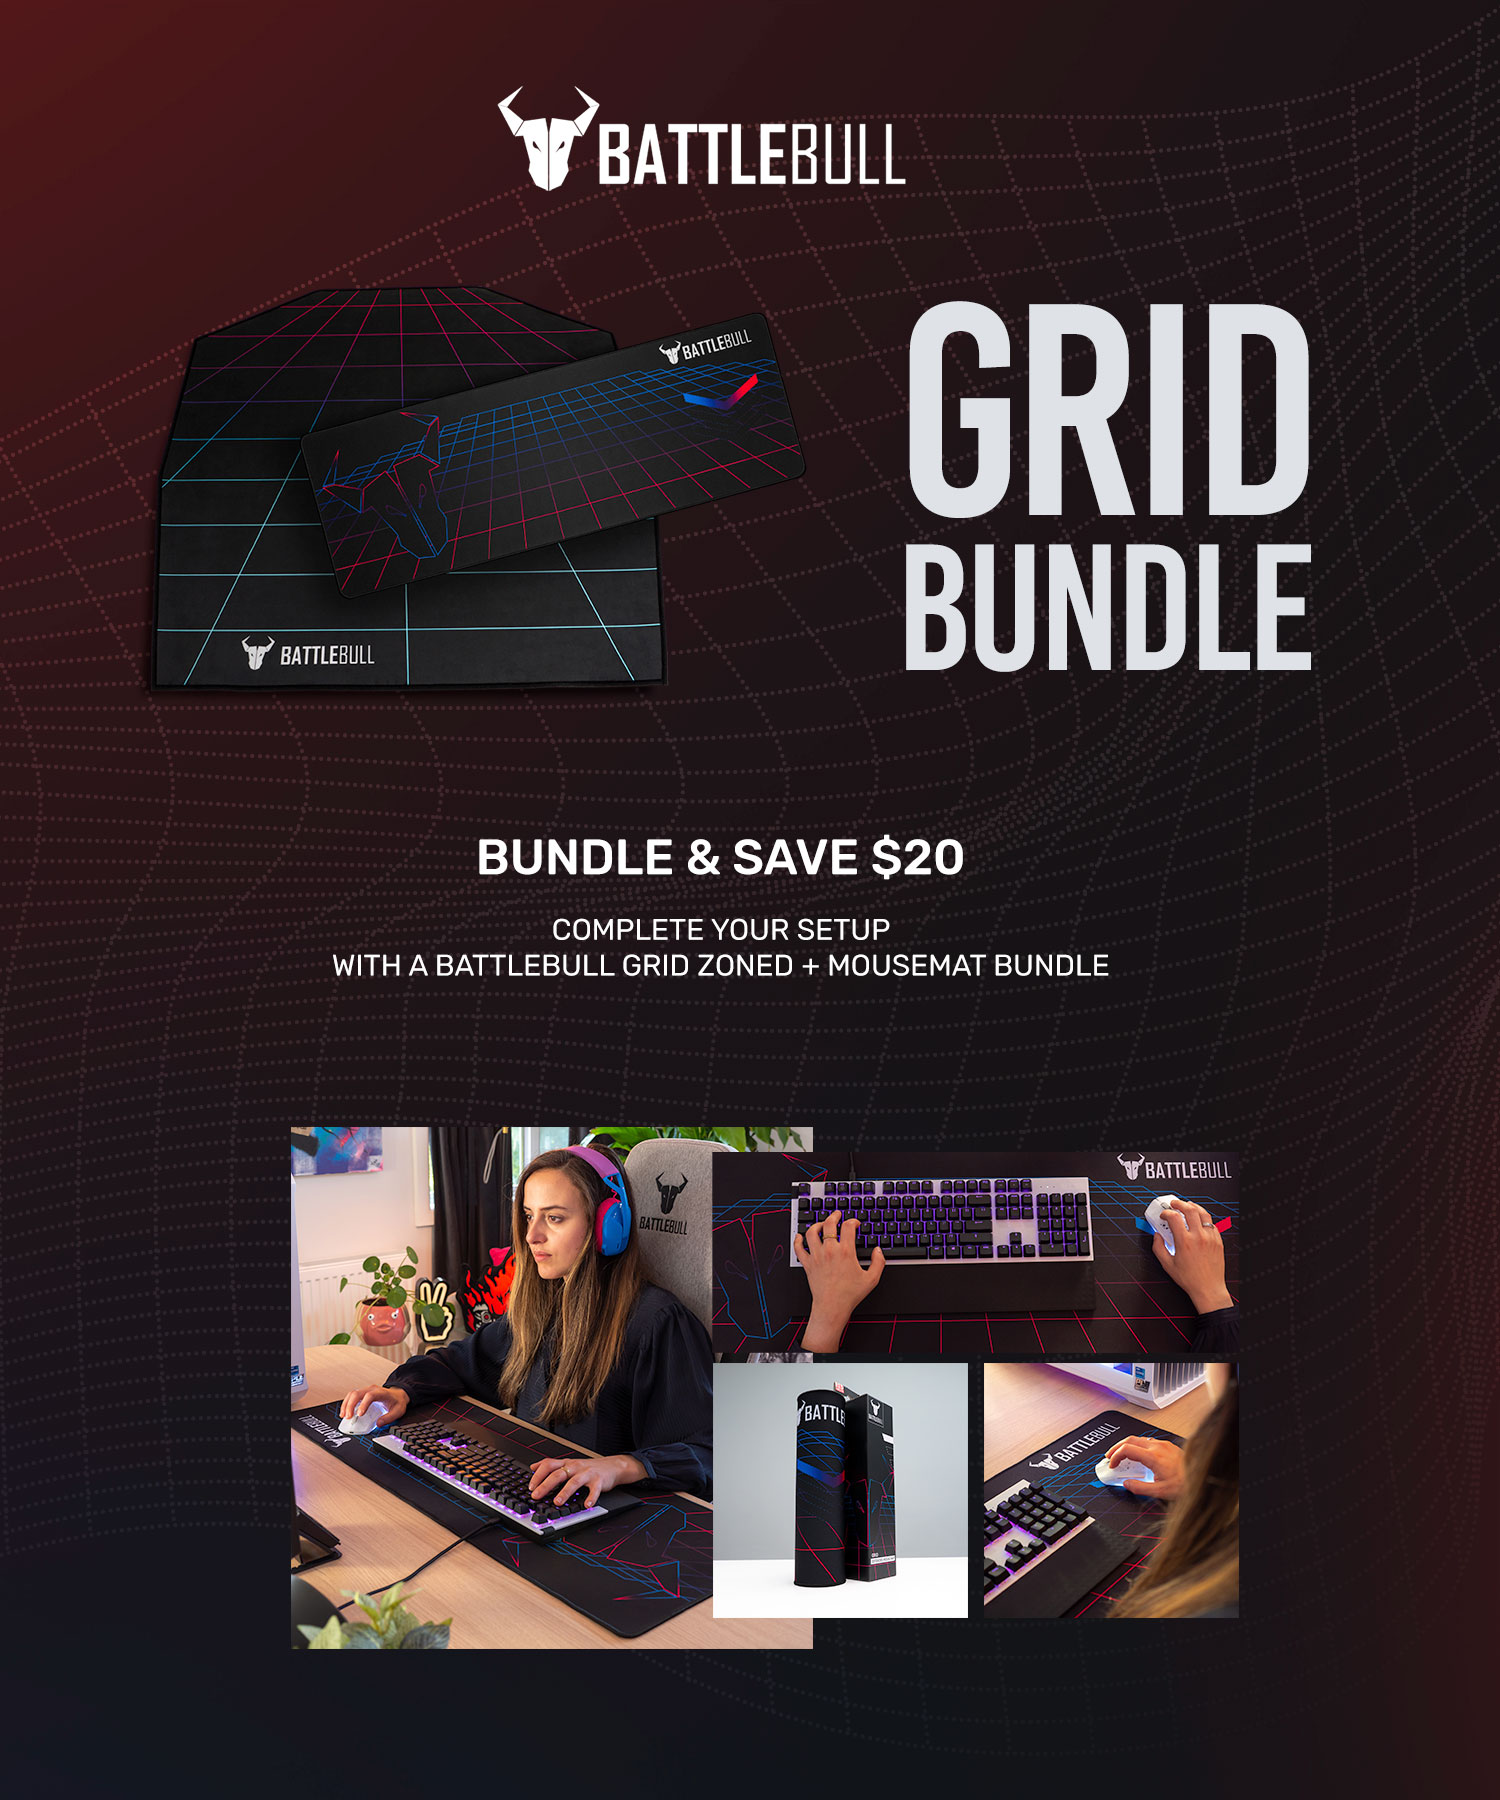 A large marketing image providing additional information about the product Battlebull Grid Zoned + Mousemat Bundle - Additional alt info not provided